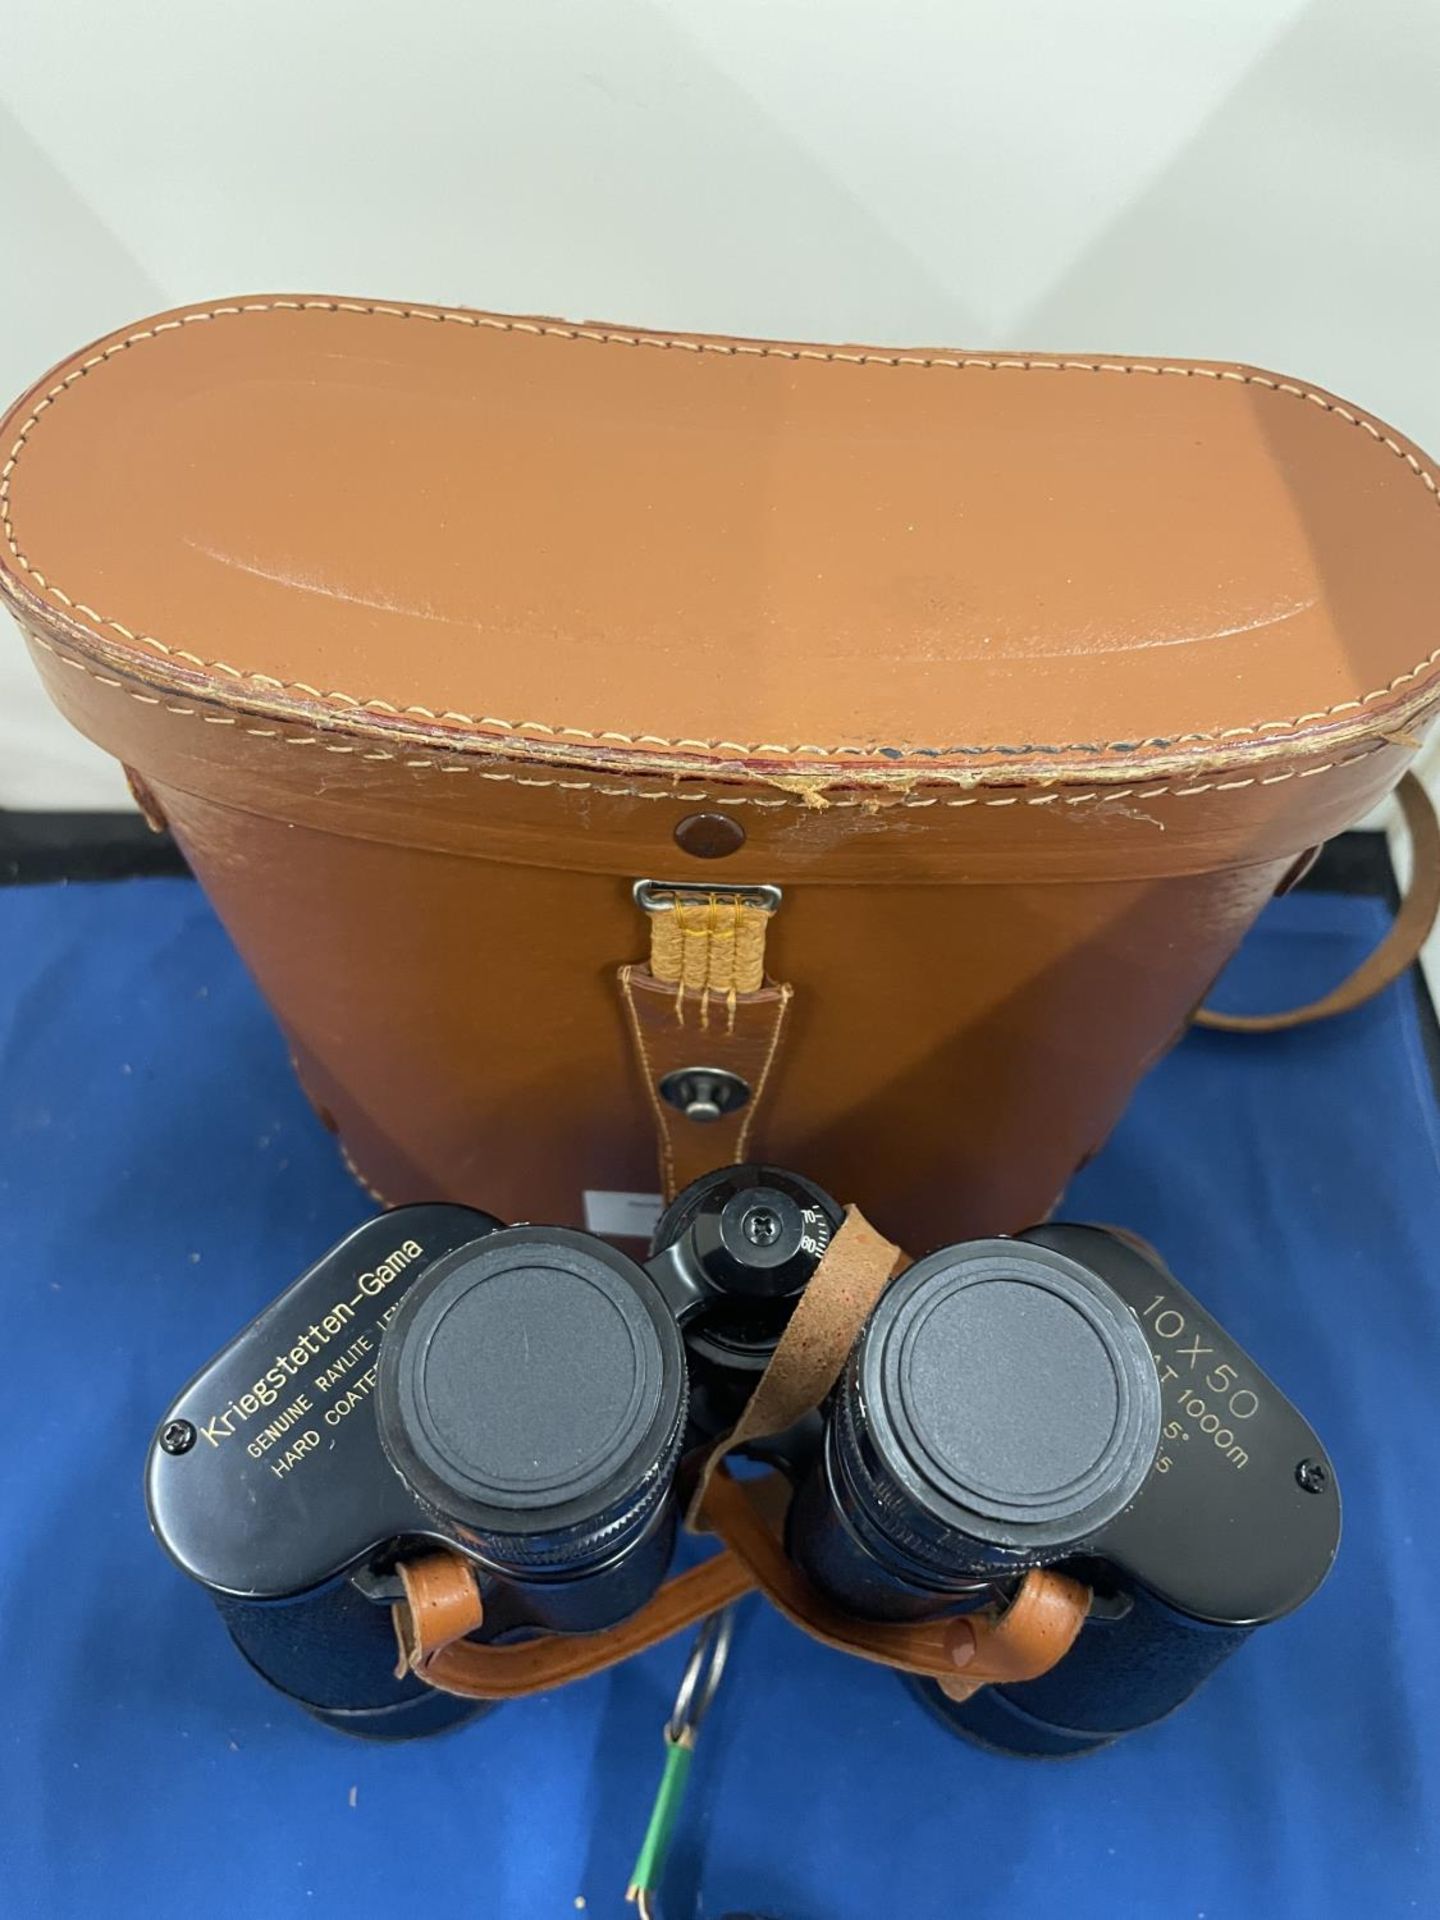 A PAIR OF KRIEGSTETTEN - GAMA BINOCULARS IN A LEATHER CASE WITH A VINTAGE LEATHER TAPE MEASURE - Image 4 of 8